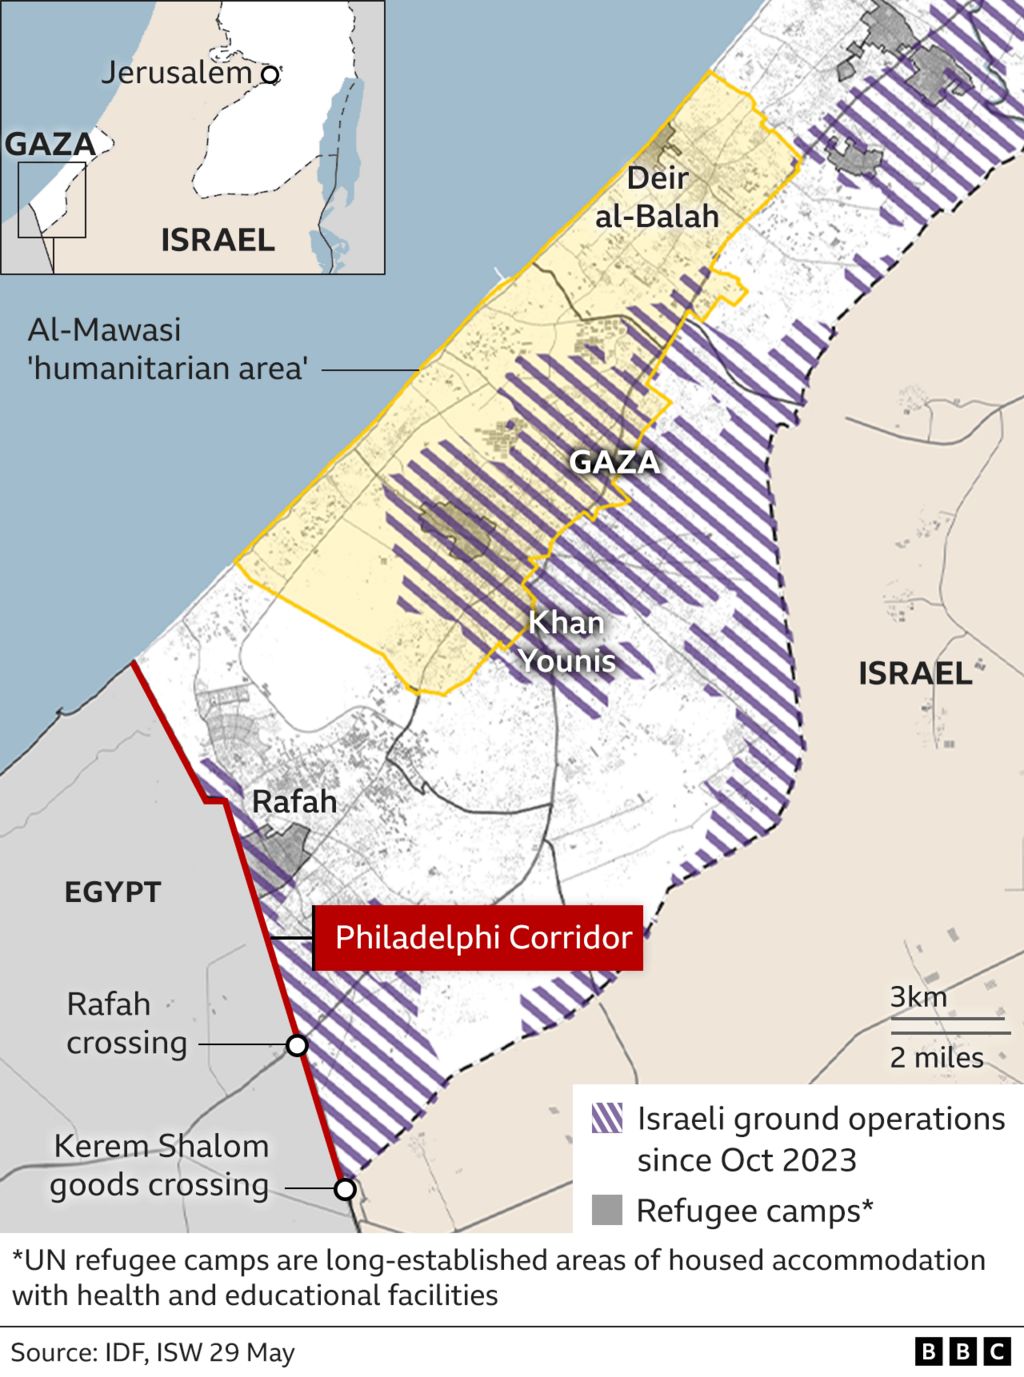 Map showing Philadelphi Corridor between Gaza and Egypt and extent of Israeli ground operations in the south